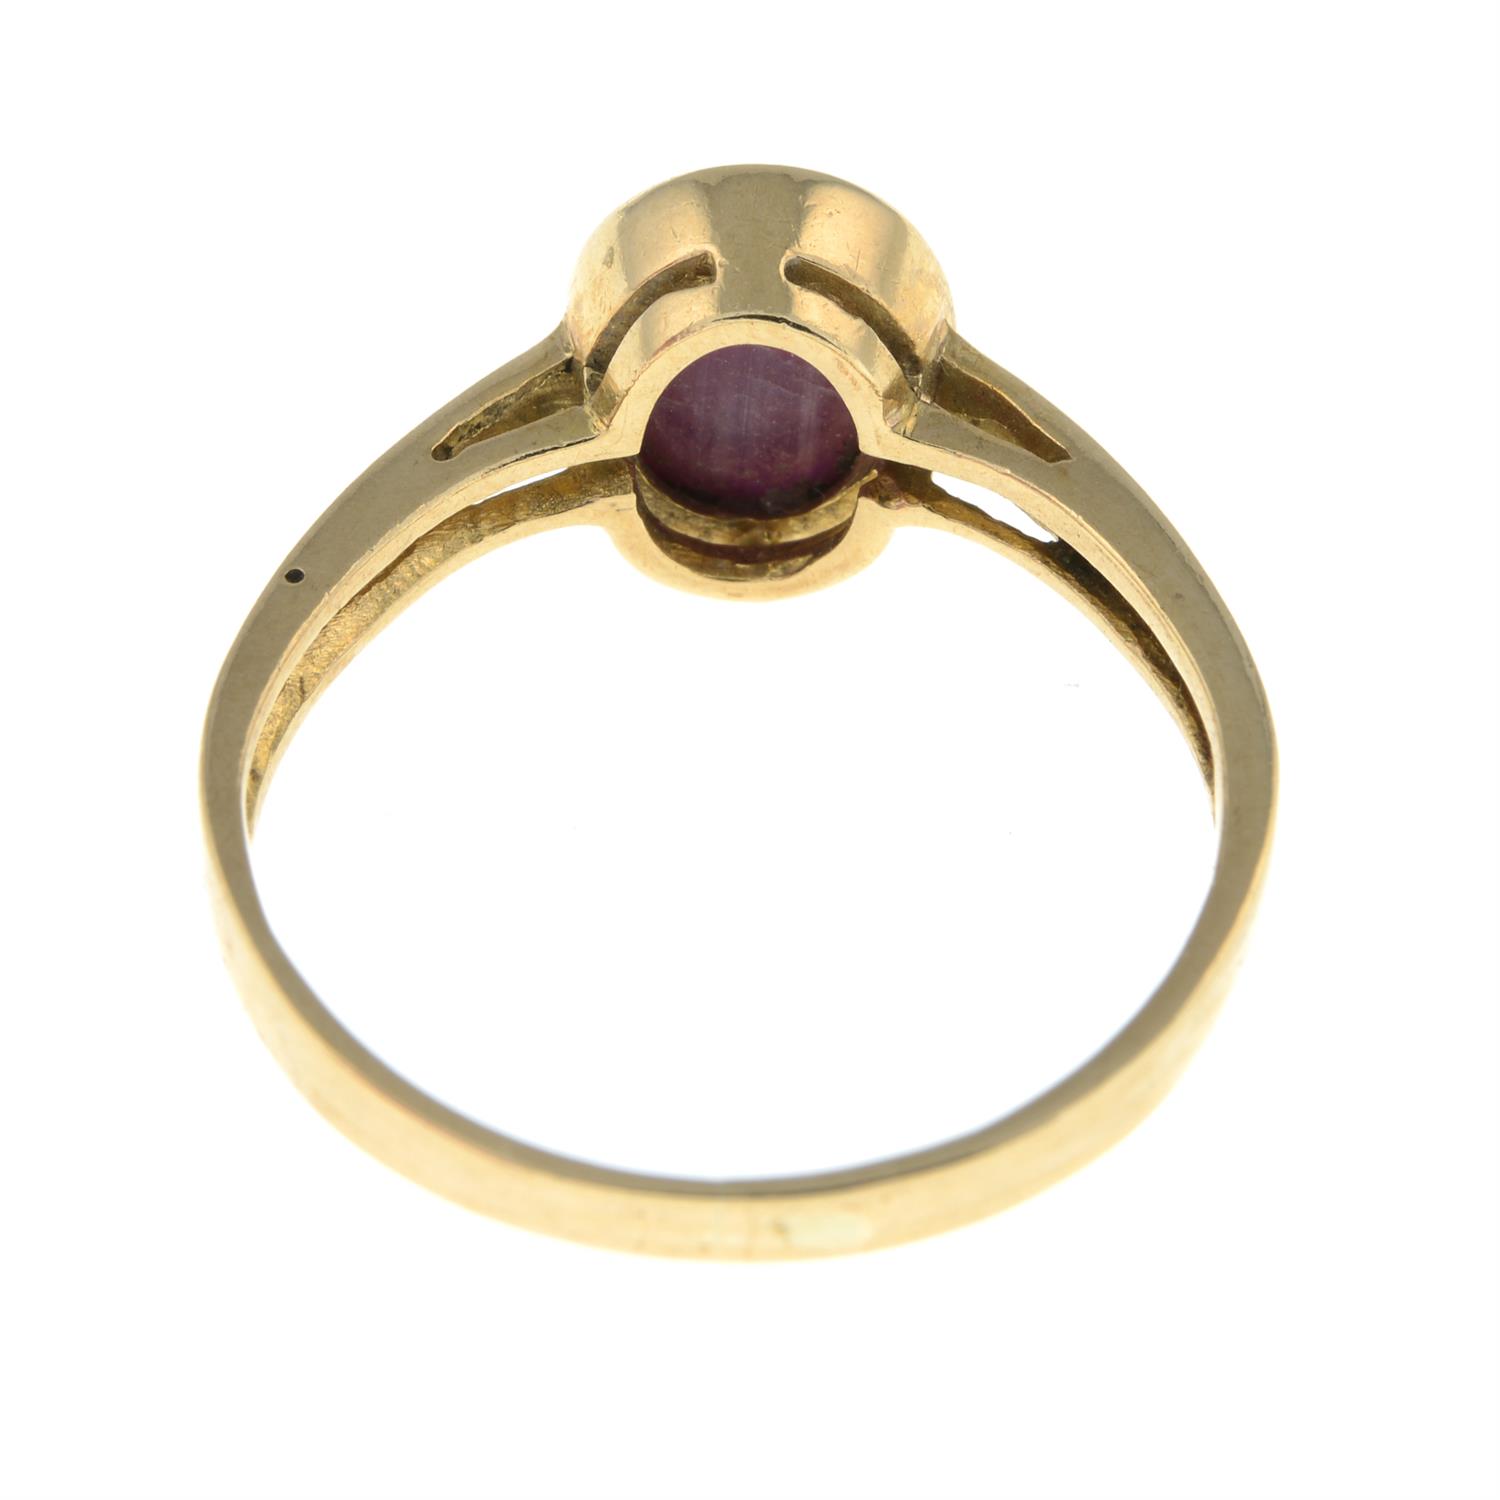 Star ruby single-stone ring - Image 2 of 2